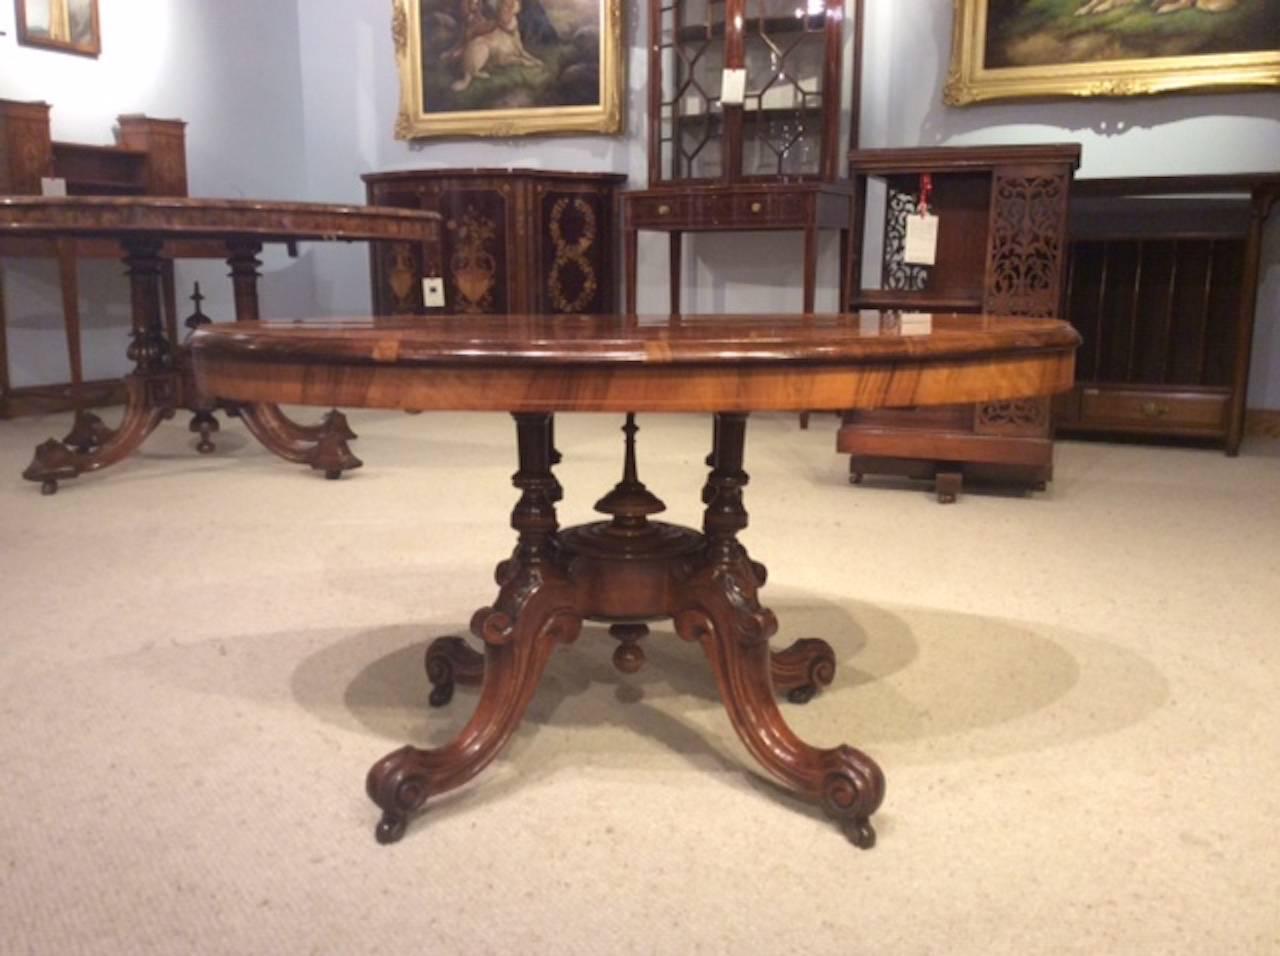 A beautiful small Victorian Period burr walnut oval coffee table. The oval top is veneered in beautifully figured burr walnut with fine floral boxwood inlaid detail and raised on four turned column supports with a central turned finial to the